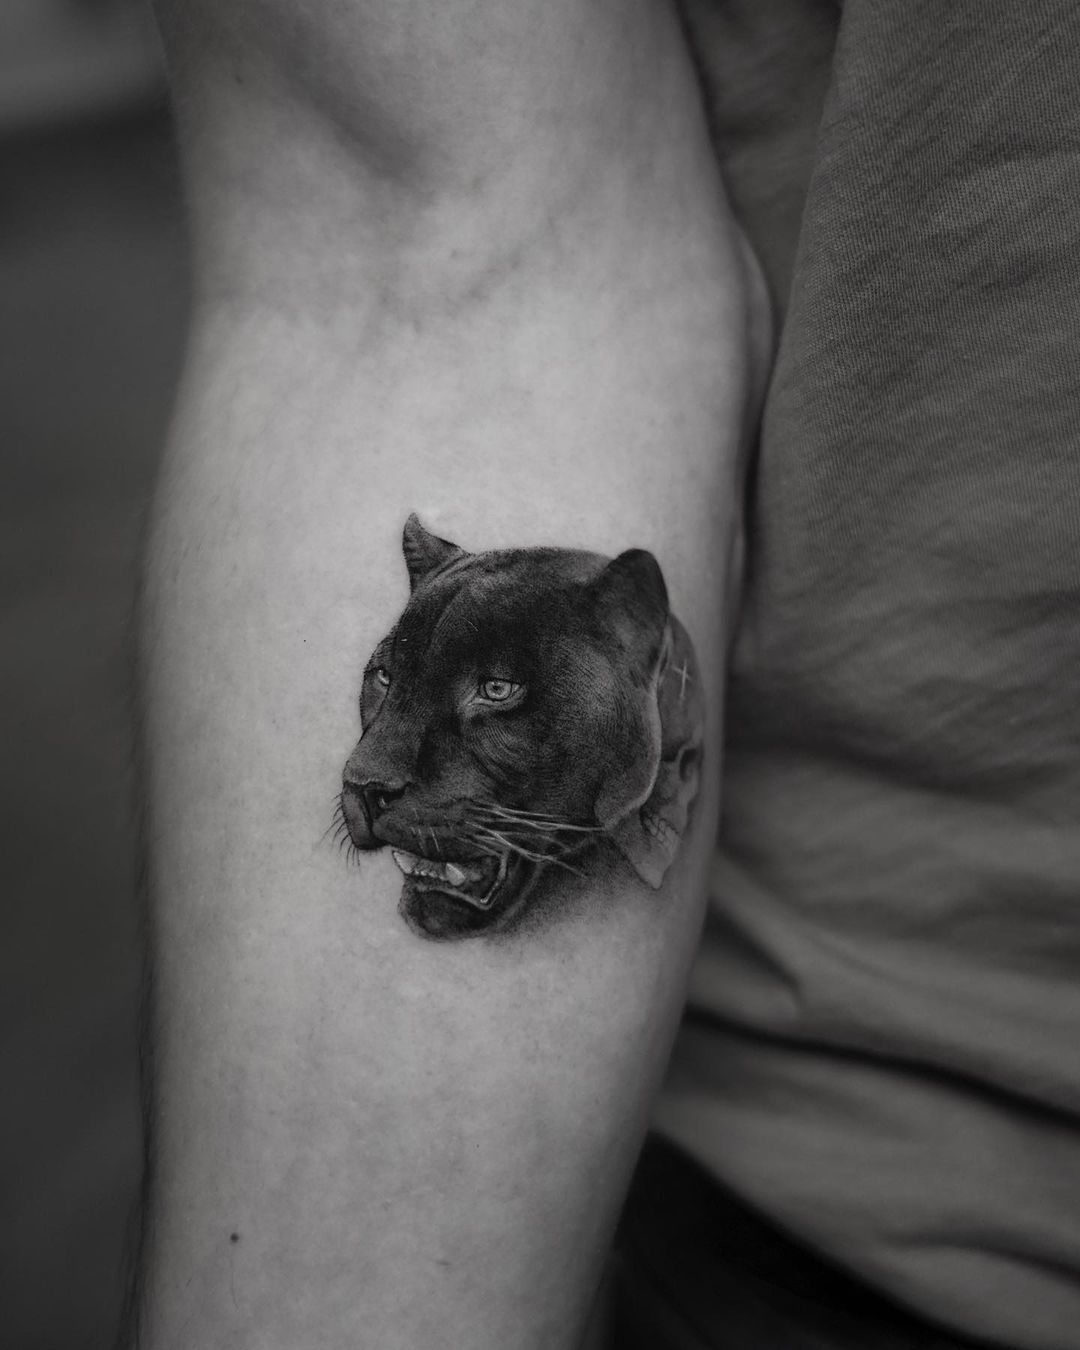 Black Gold Tattoo Co - ⬛ 🐈 Black Panther Tattoo By @djpush2003 Realism or  Illustrative? Book your Consult 587-520-4653 | Facebook